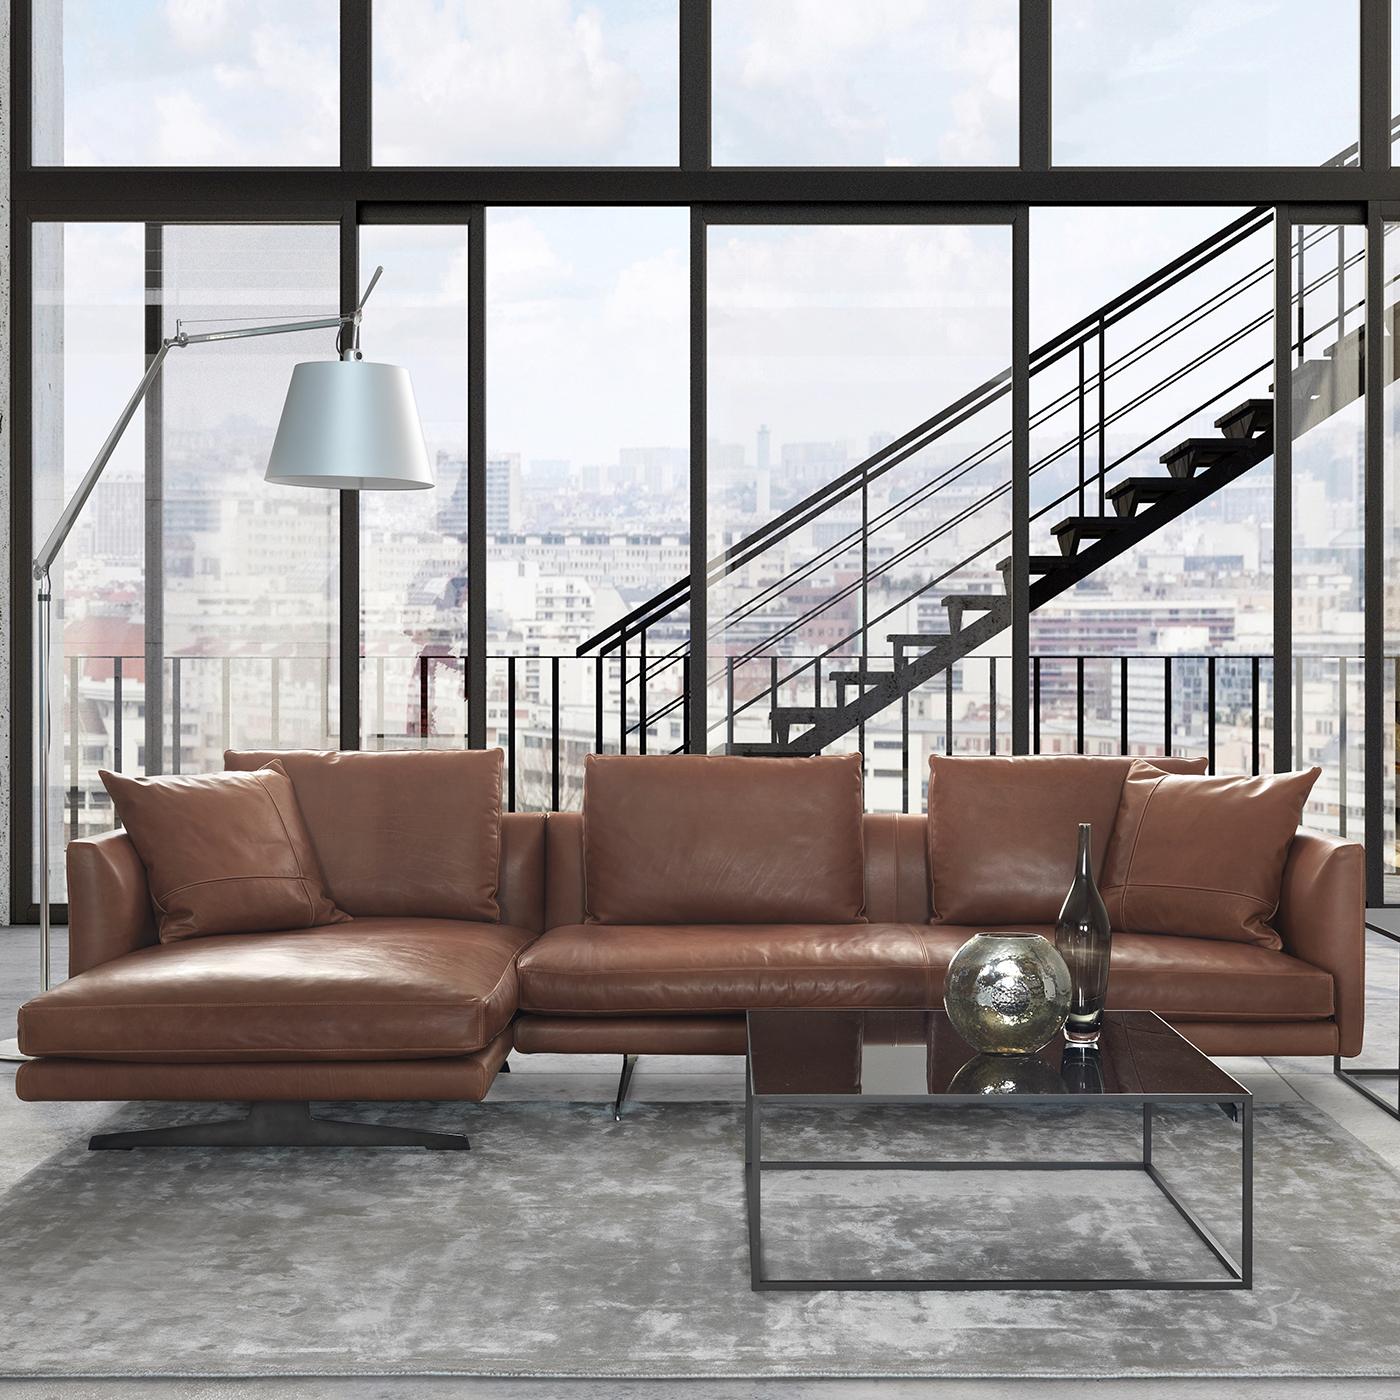 A sober and discreet sofa that transcends time and trends. It stands out due to its absolute simplicity and attention to detail. The feet lift the structure from the ground, accentuating the minimalist, refined character of the seat. It features a